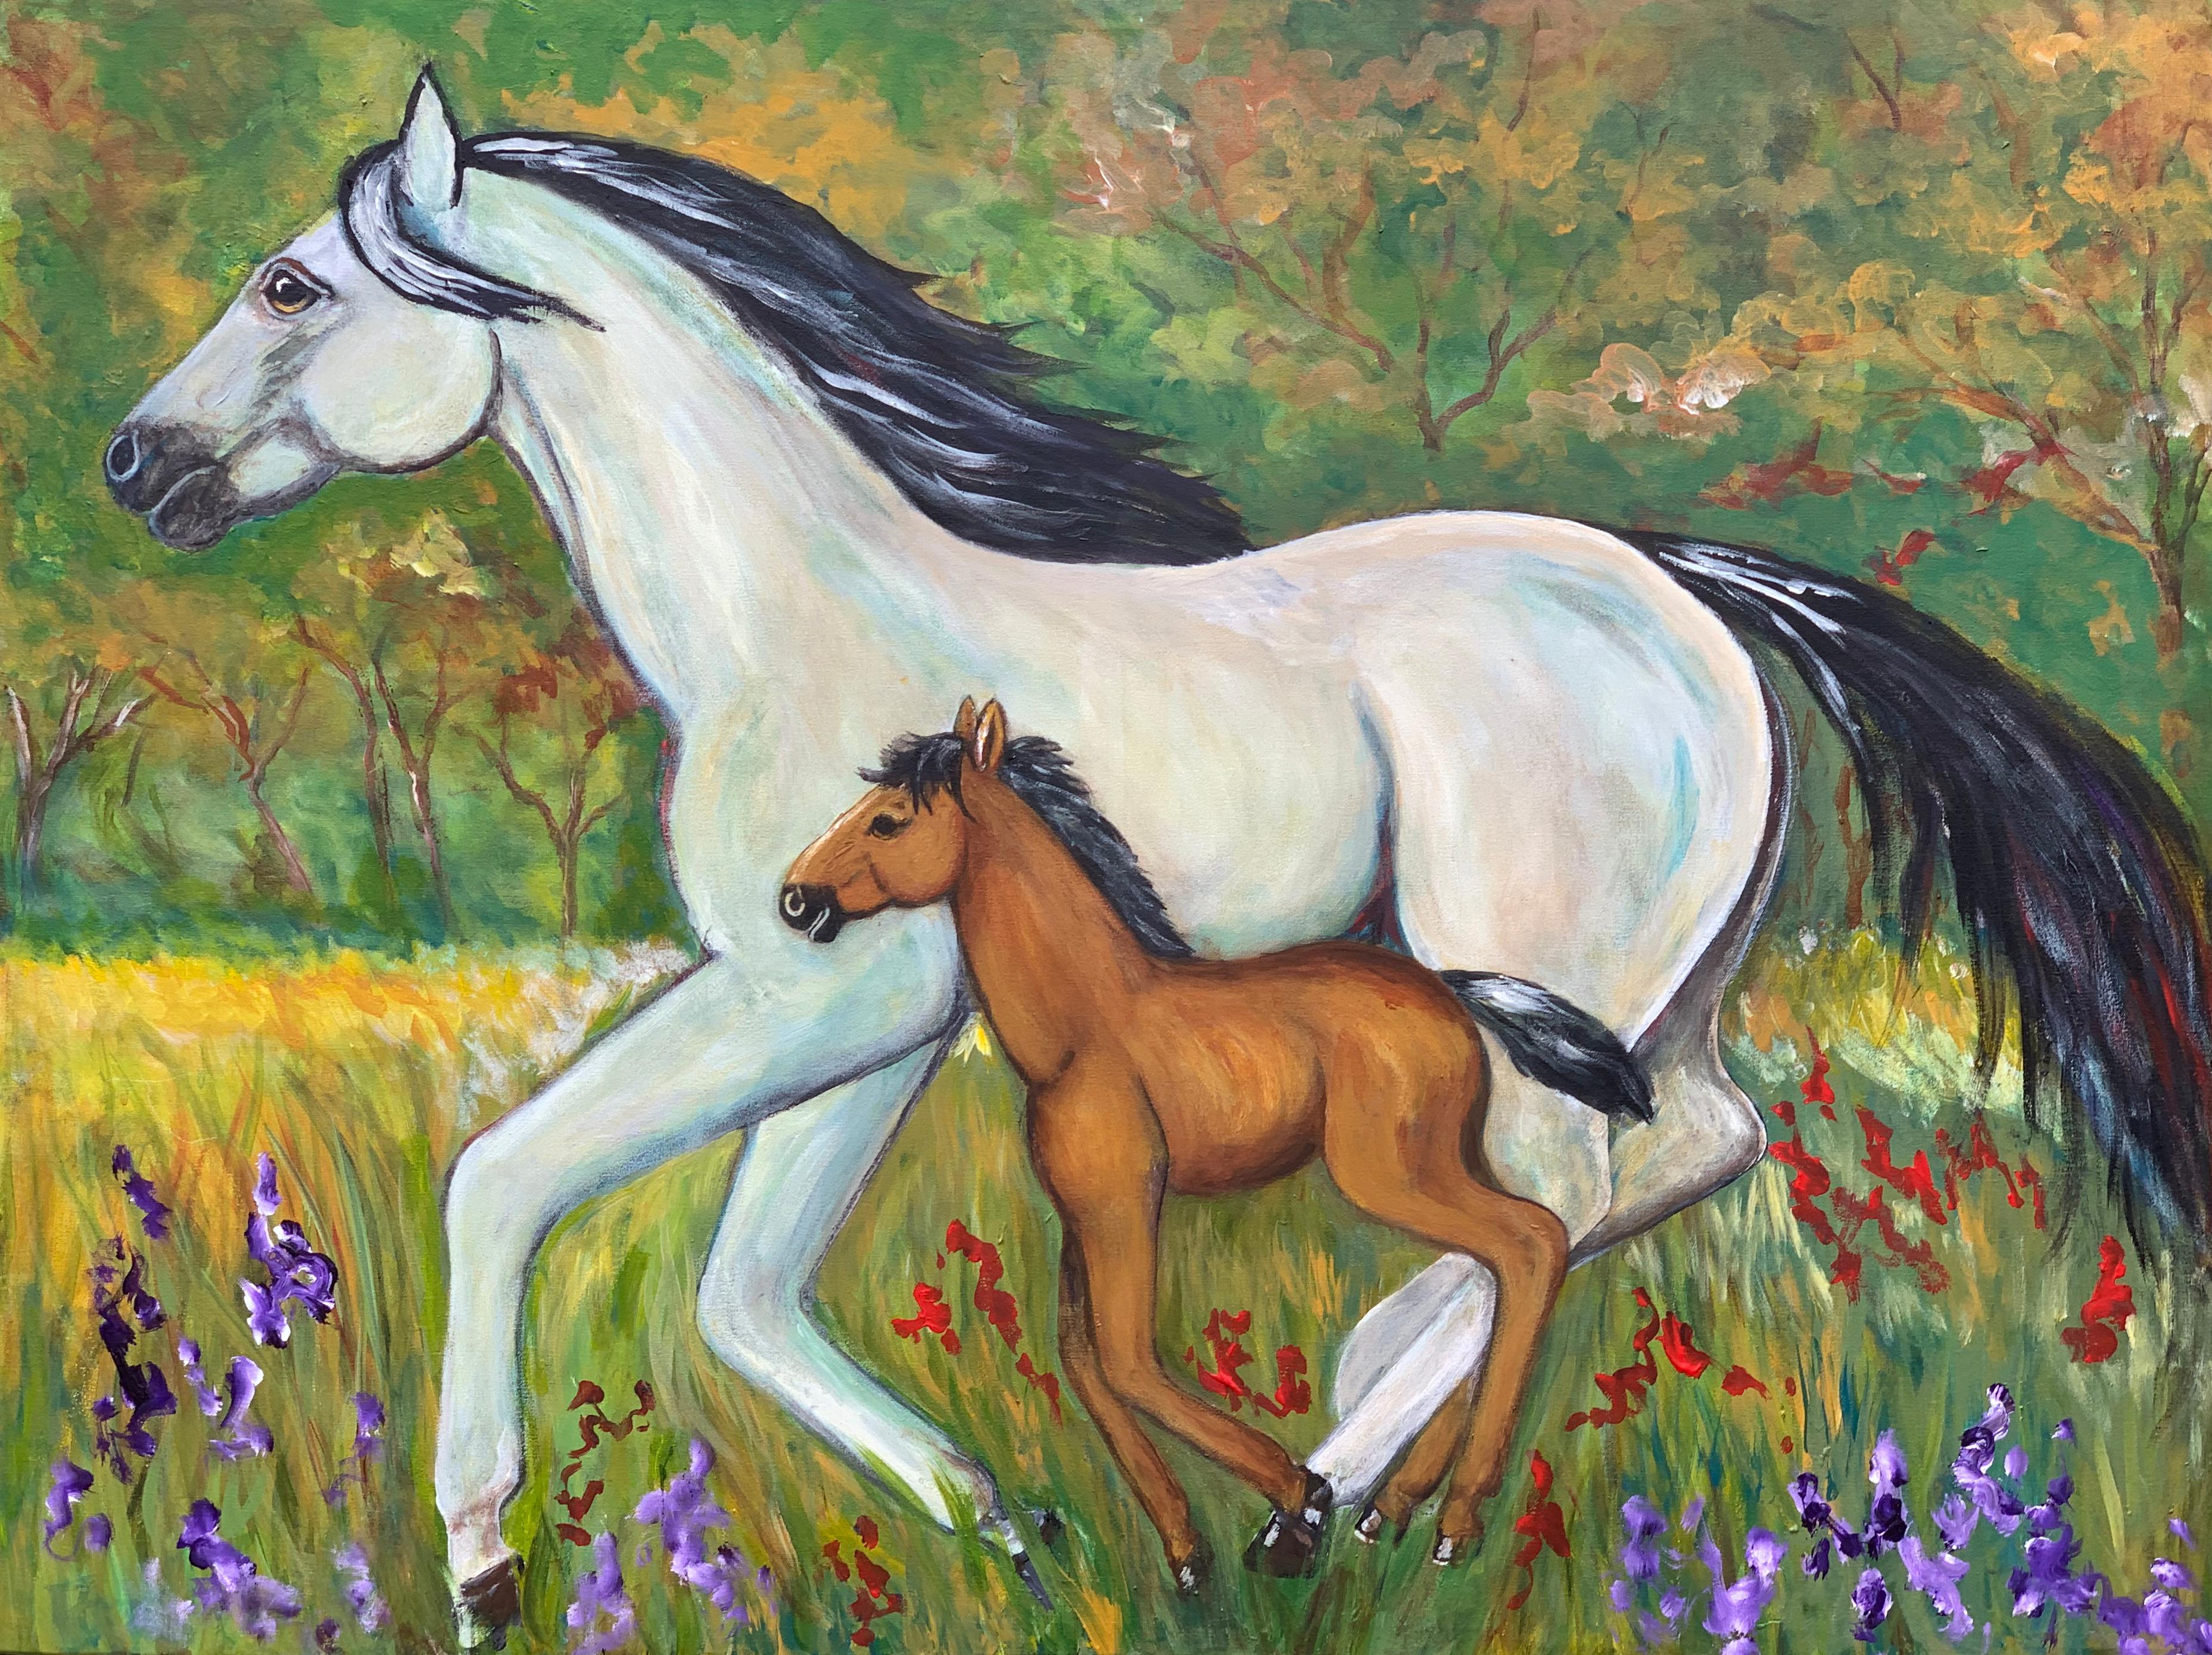 2009 F. Gillotti 'Venerable' horse and foal painting acrylic on stretched canvas. Measures: 36 H x 48 W.